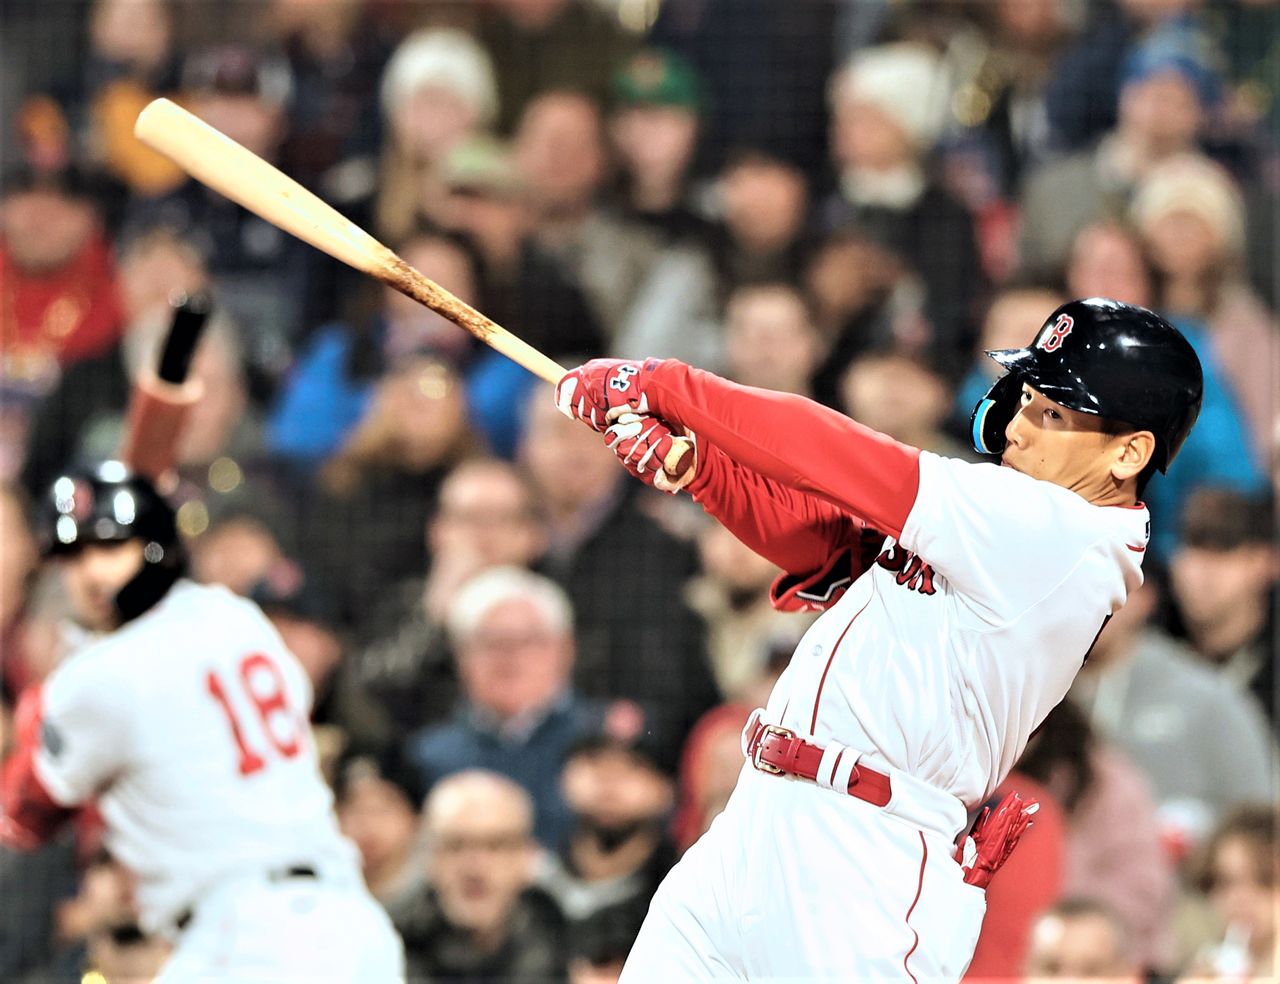 The Red Sox’s Yoshida Masataka hits a tape-measure shot for his first MLB home run in a game at Boston’s Fenway Park on April 3, 2023. (© Jiji)